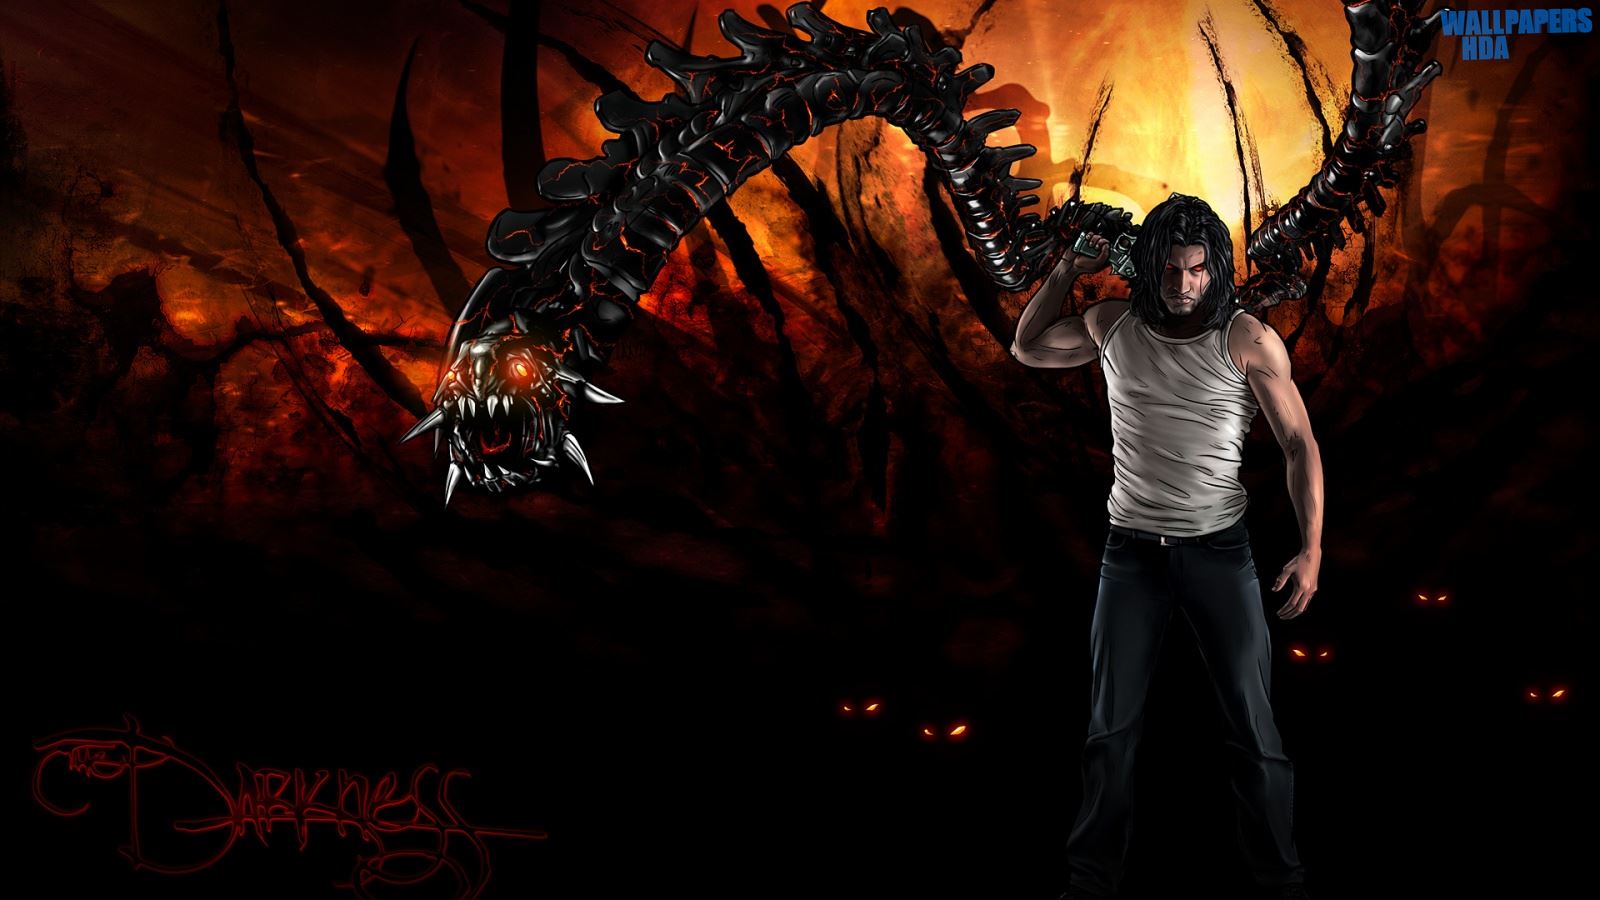 The darkness ii 2012 game 1600x900